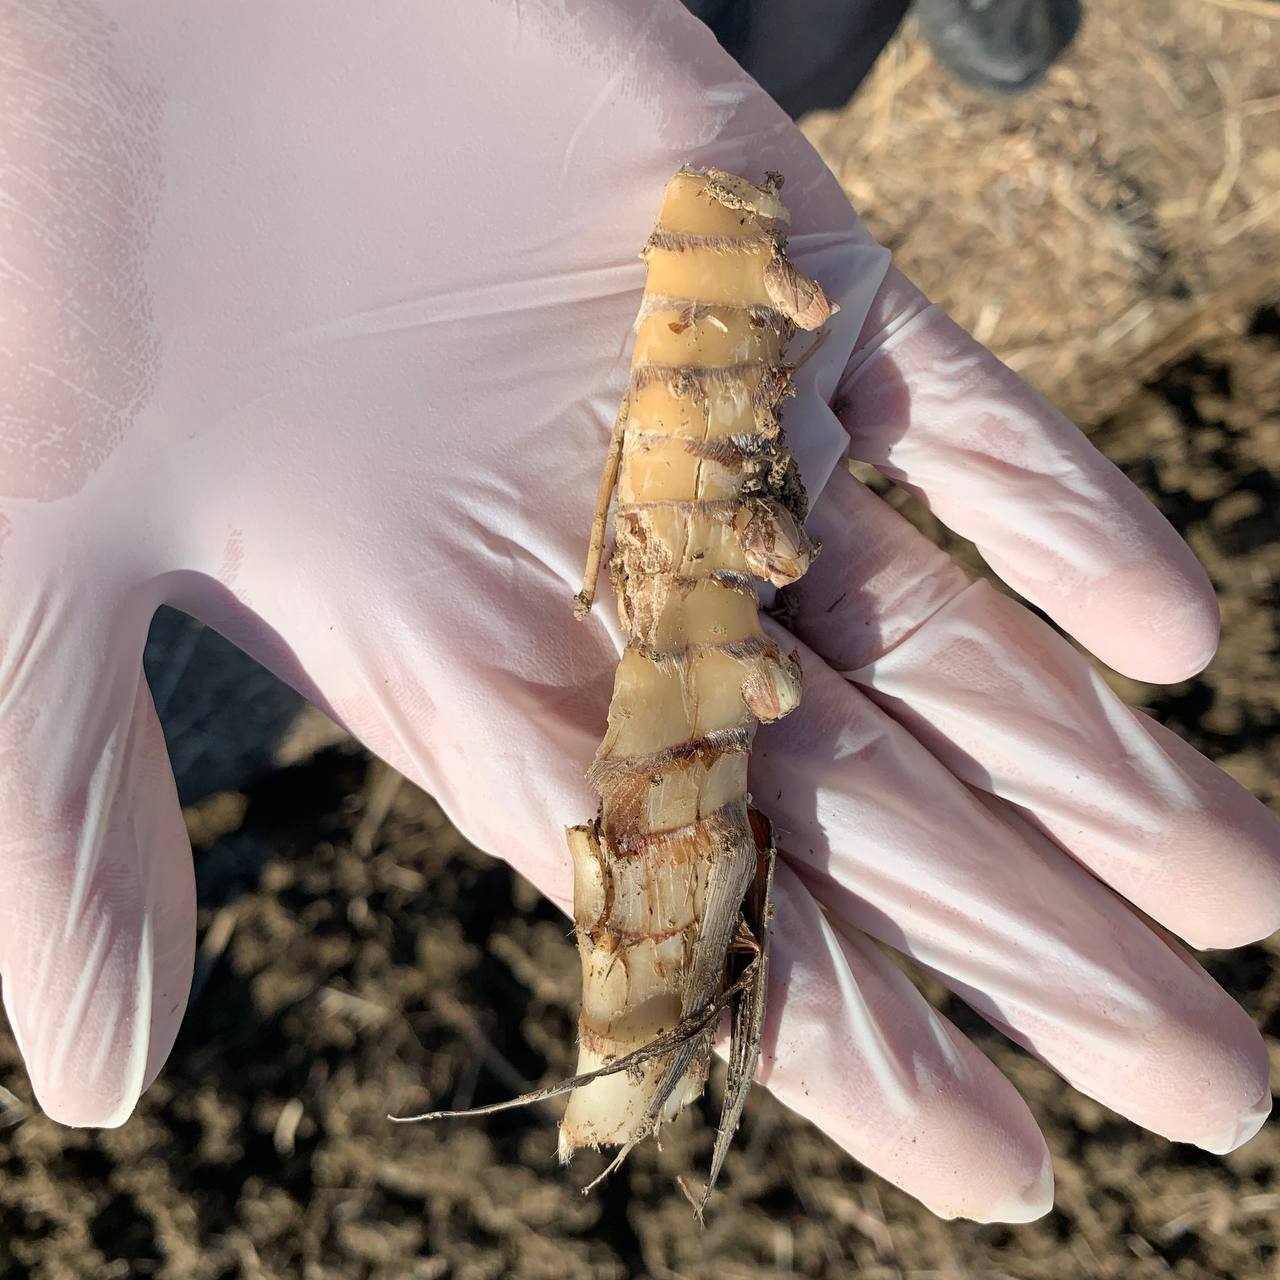 The image displays a hand in a light pink glove holding a segmented, beige-colored rhizome of Miscanthus x Giganteus with bits of soil and small roots attached to it. Rhizomes like this are typically used for planting and propagation purposes.